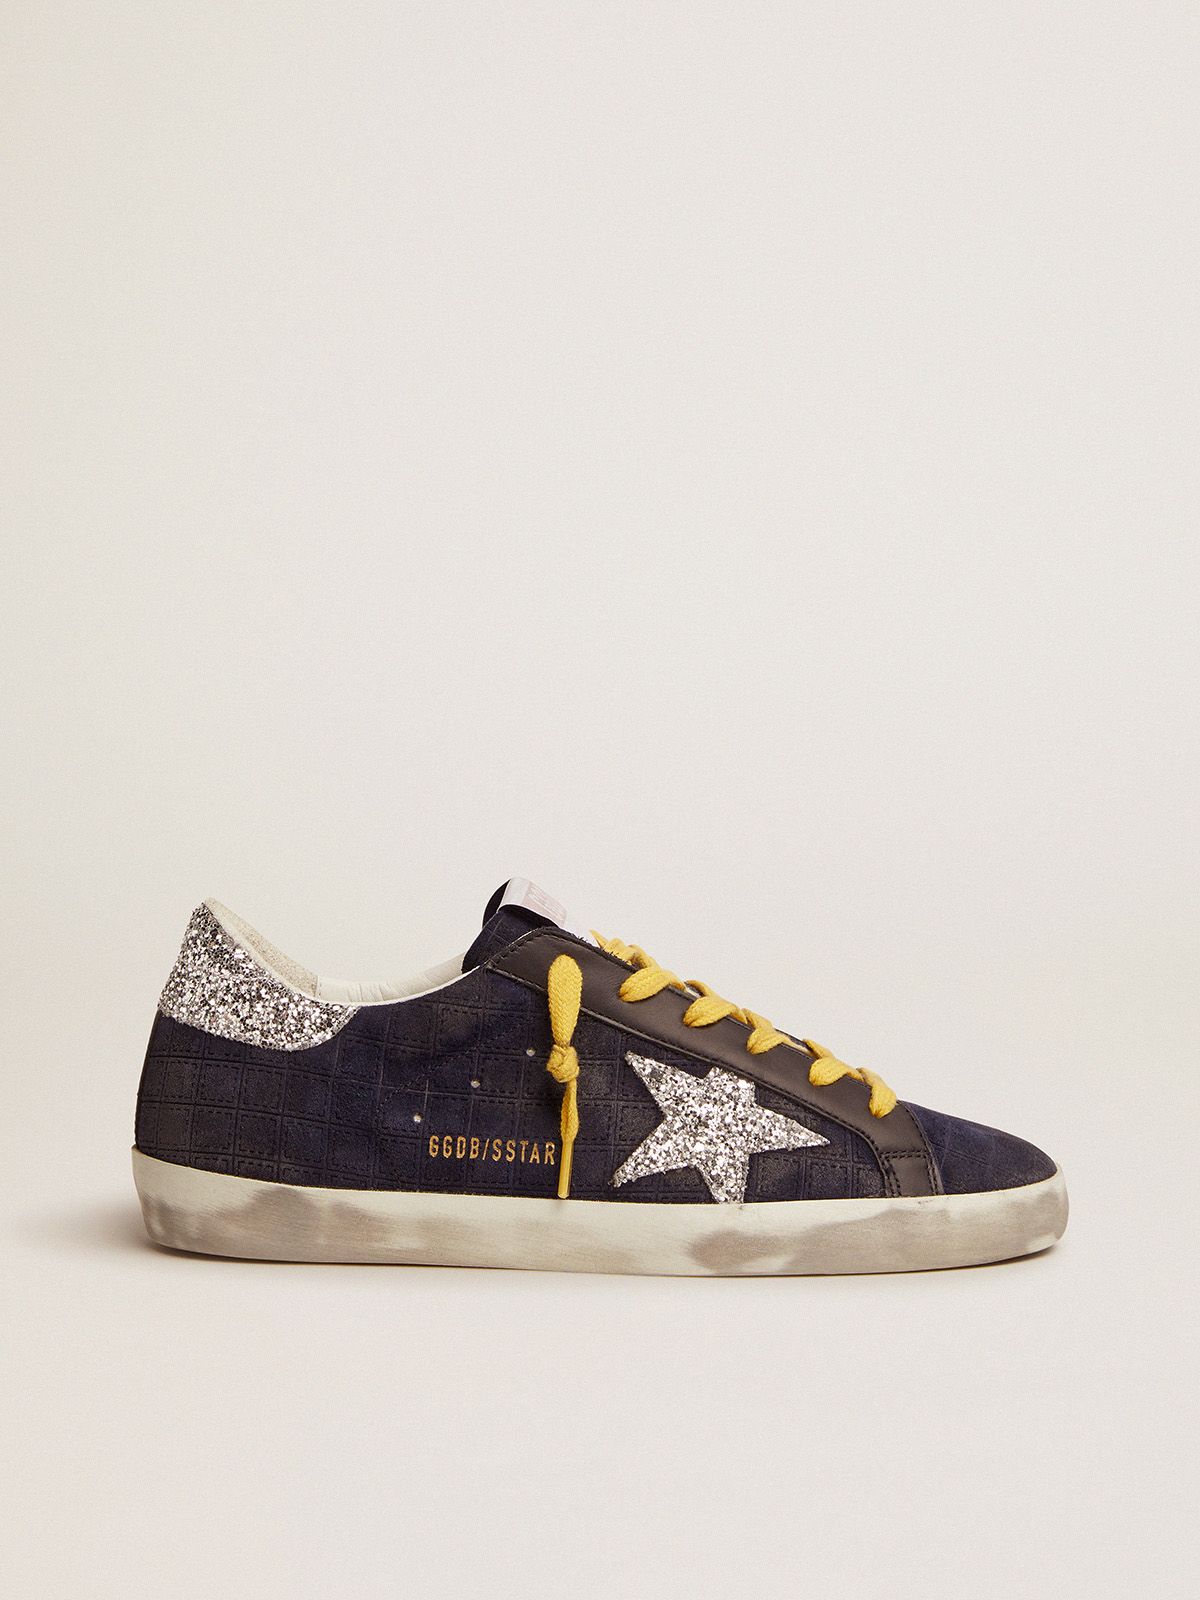 Super-Star sneakers in dark blue suede with checkered pattern and silver glitter details